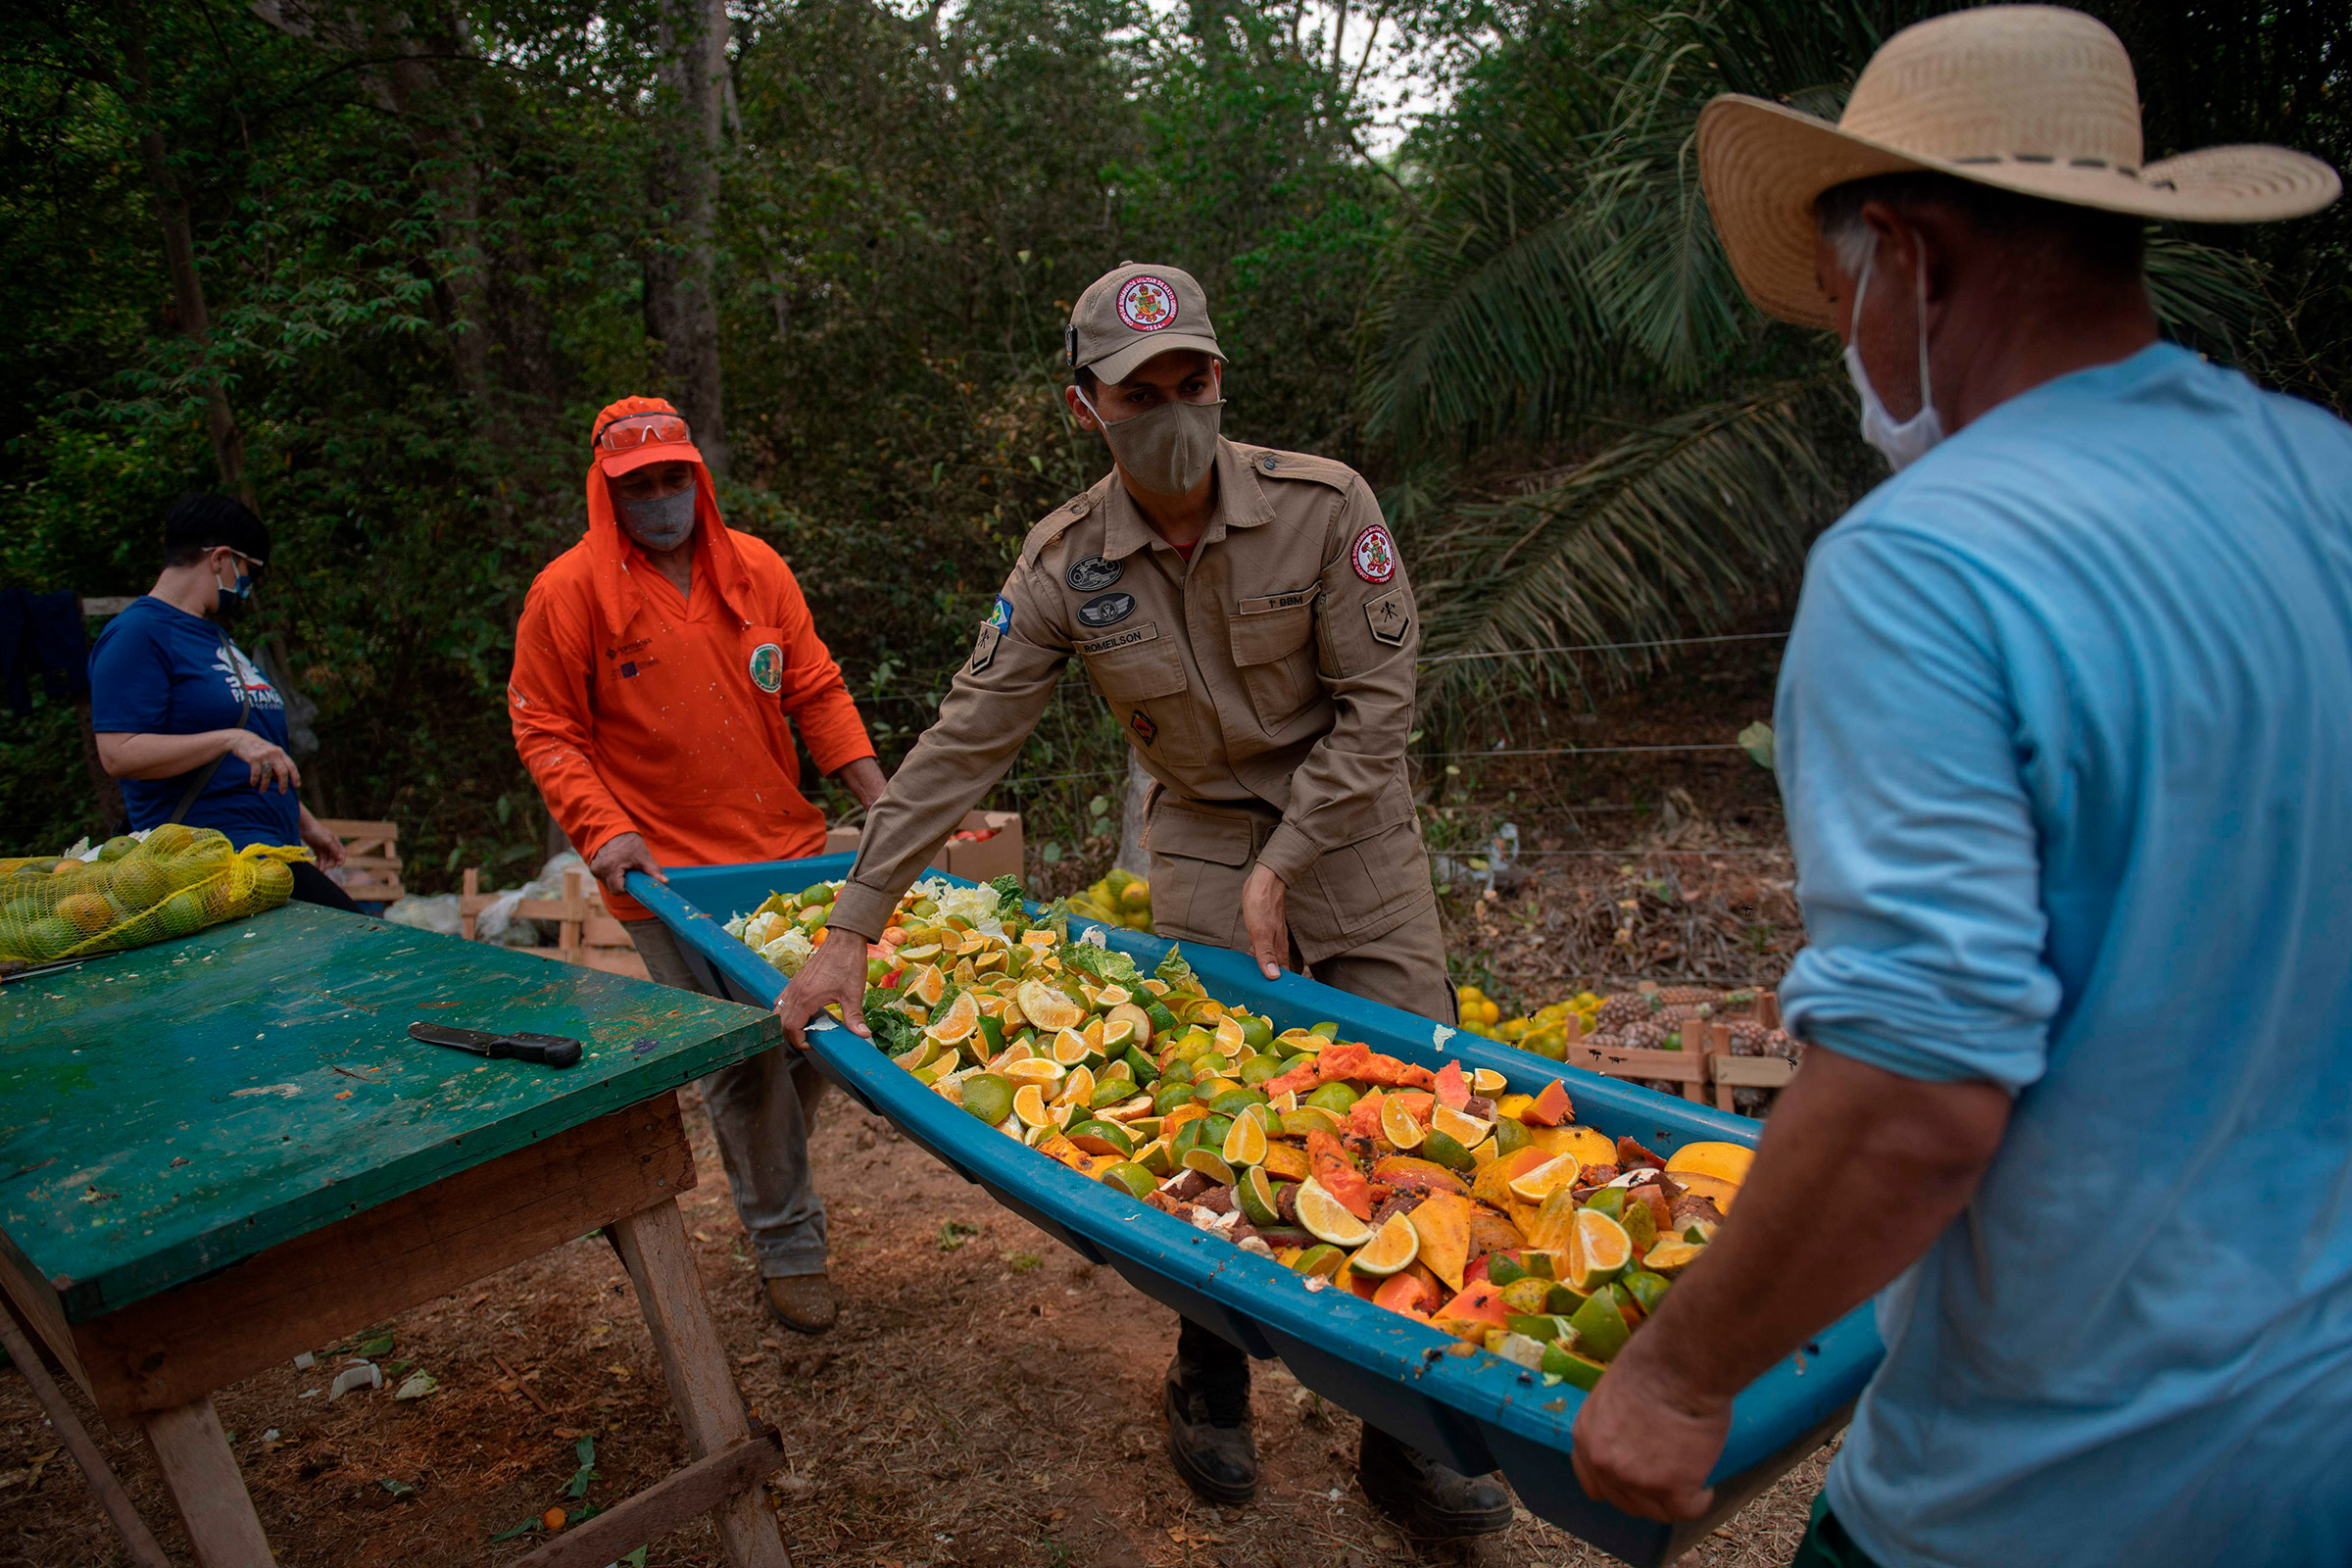 Inmates organize food to be distributed to animals on Sept. 19. (Mauro Pimentel—AFP/Getty Images)